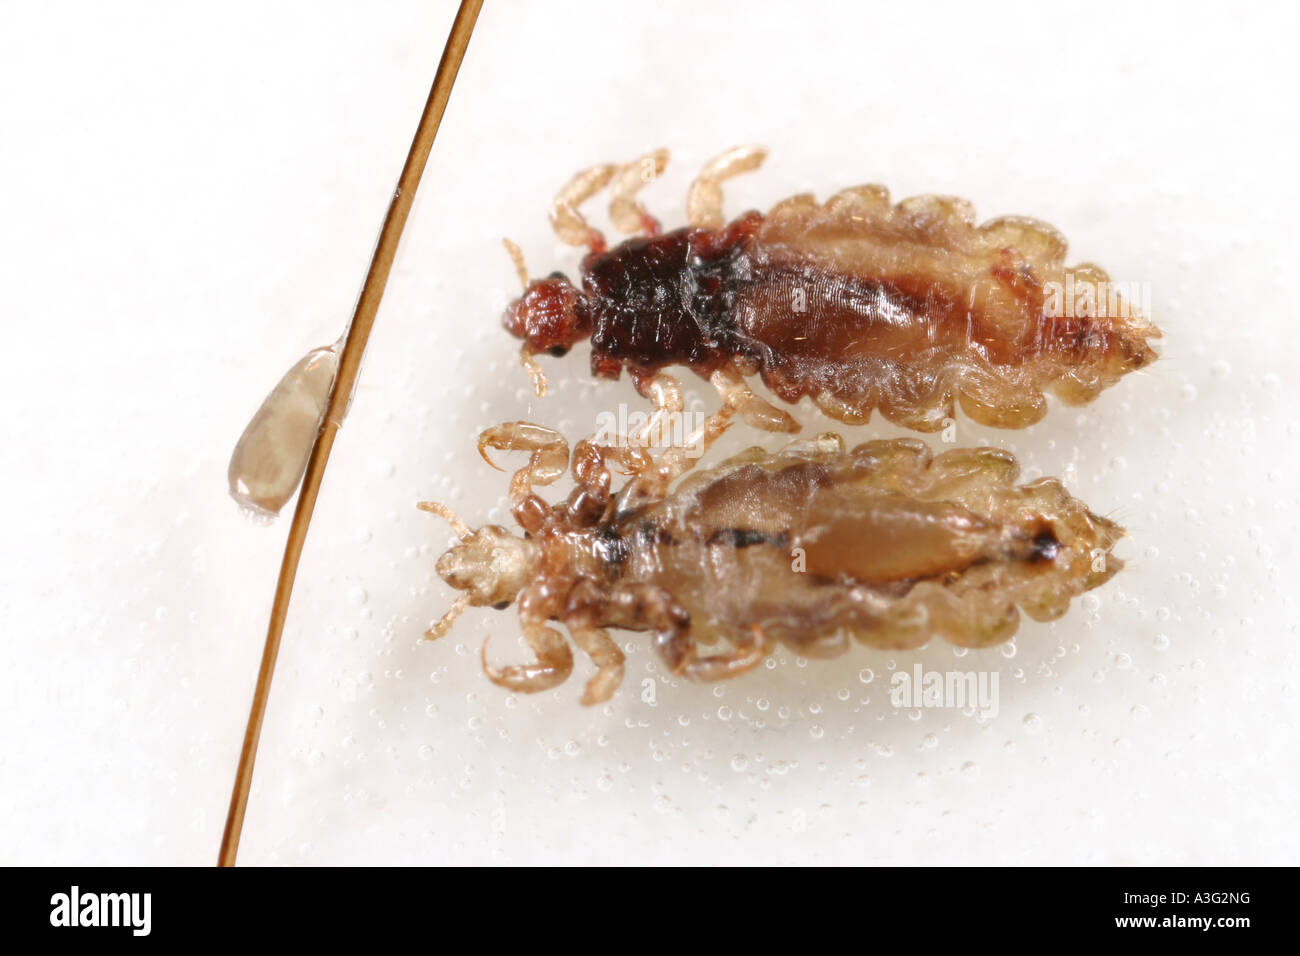 A pair of dead head lice and egg on human hair. Stock Photo